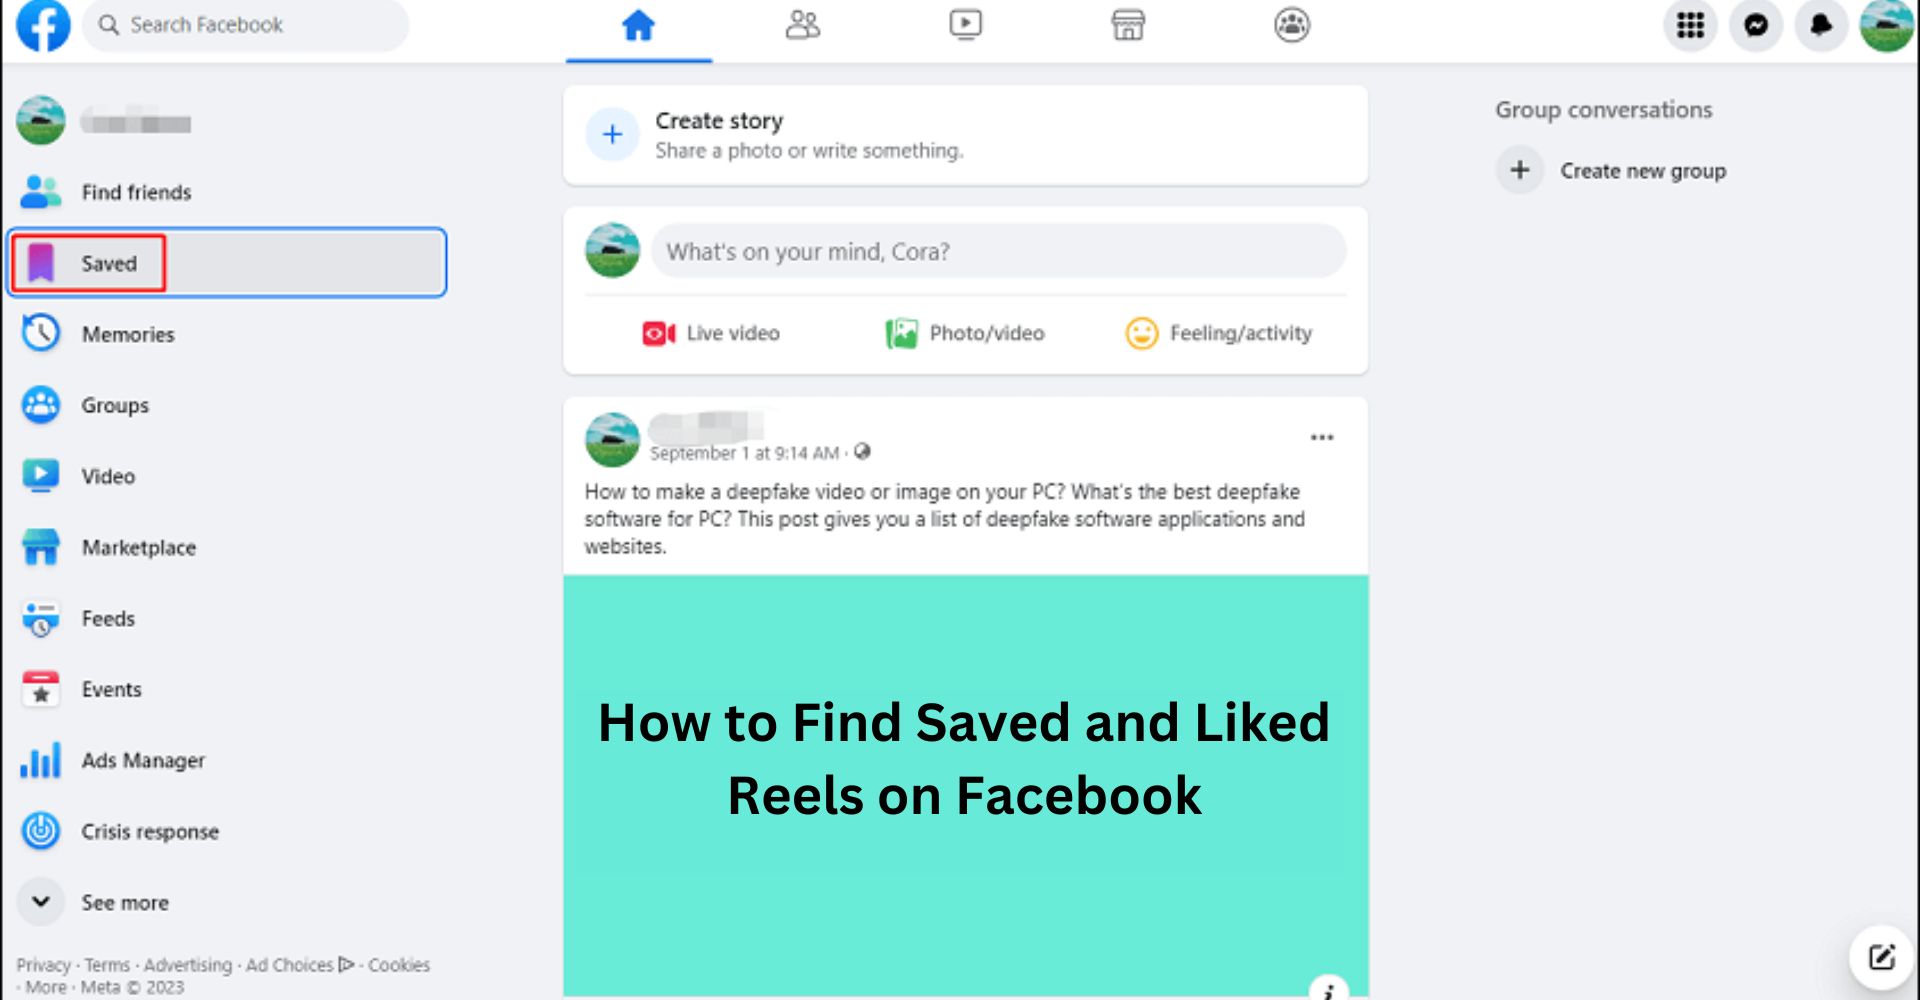 How to Find Saved and Liked Reels on Facebook